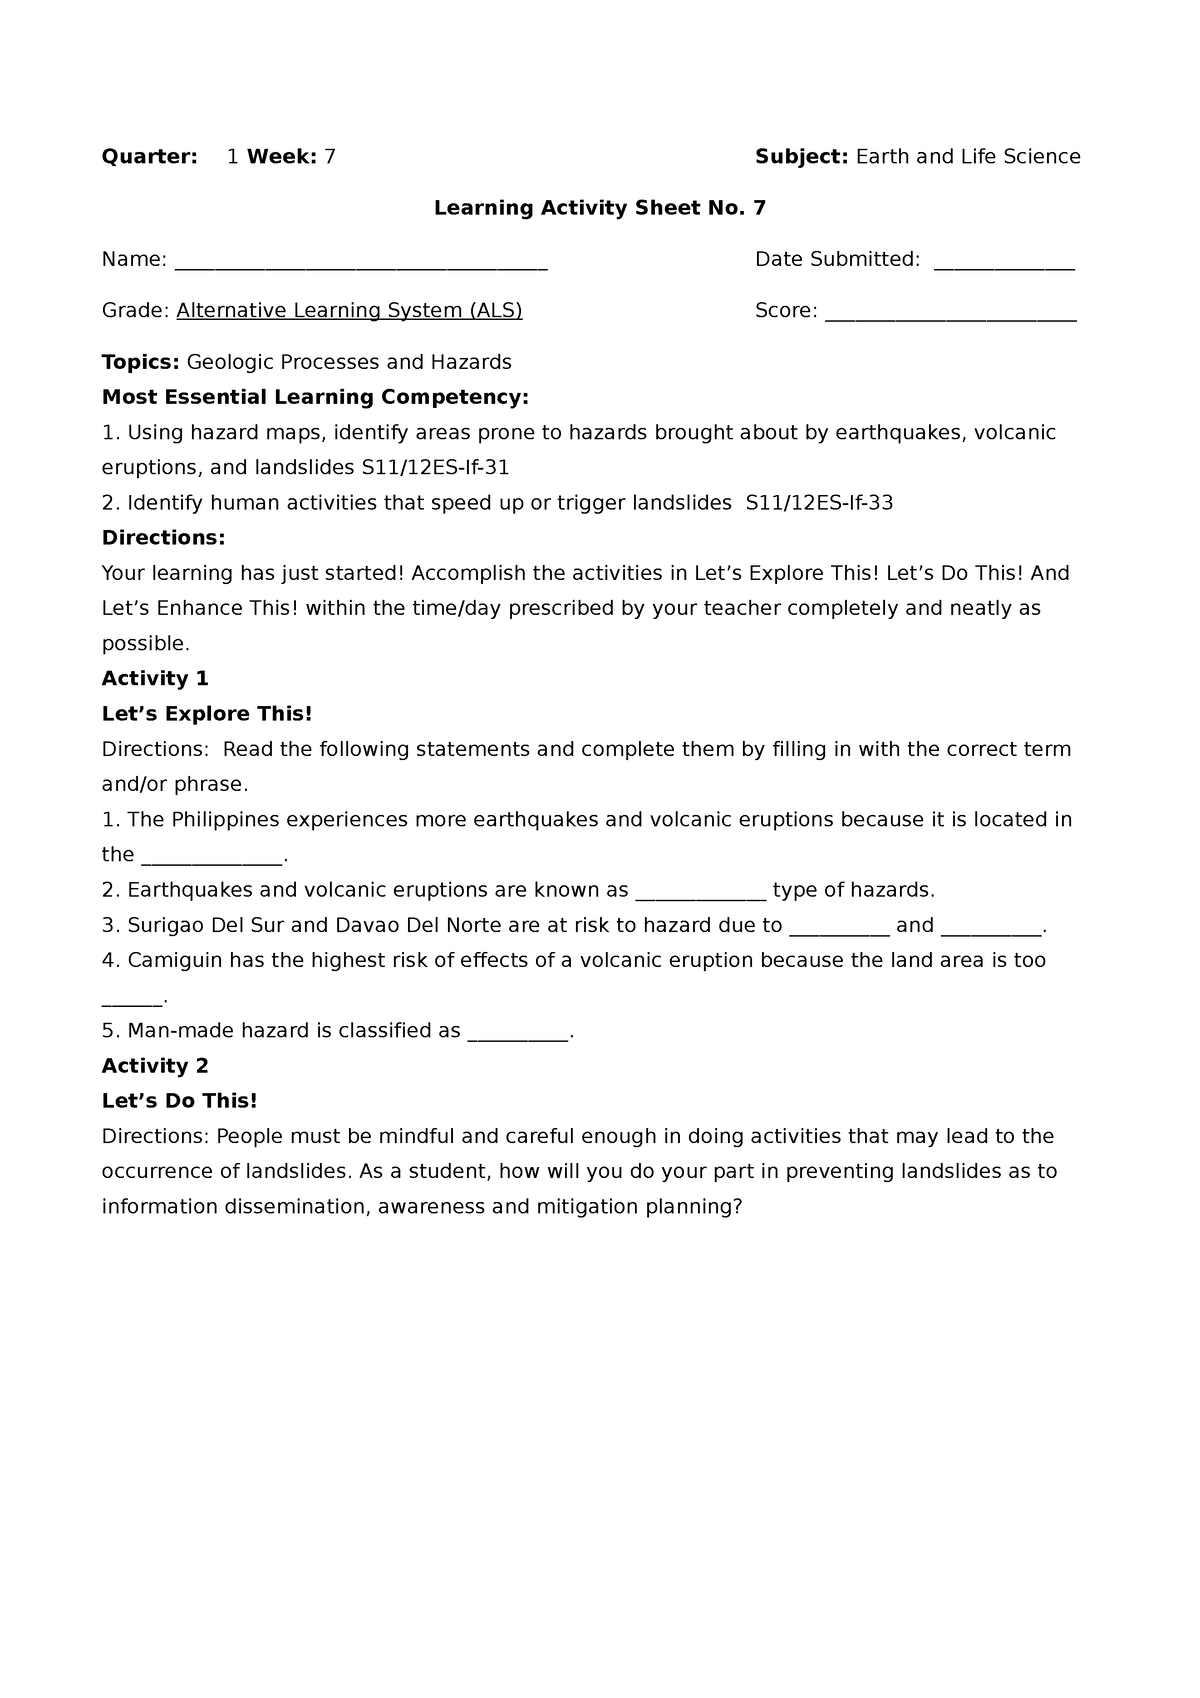 Learning Activity Sheet No 7 Els Key Quarter 1 Week 7 Subject Earth And Life Science 5452